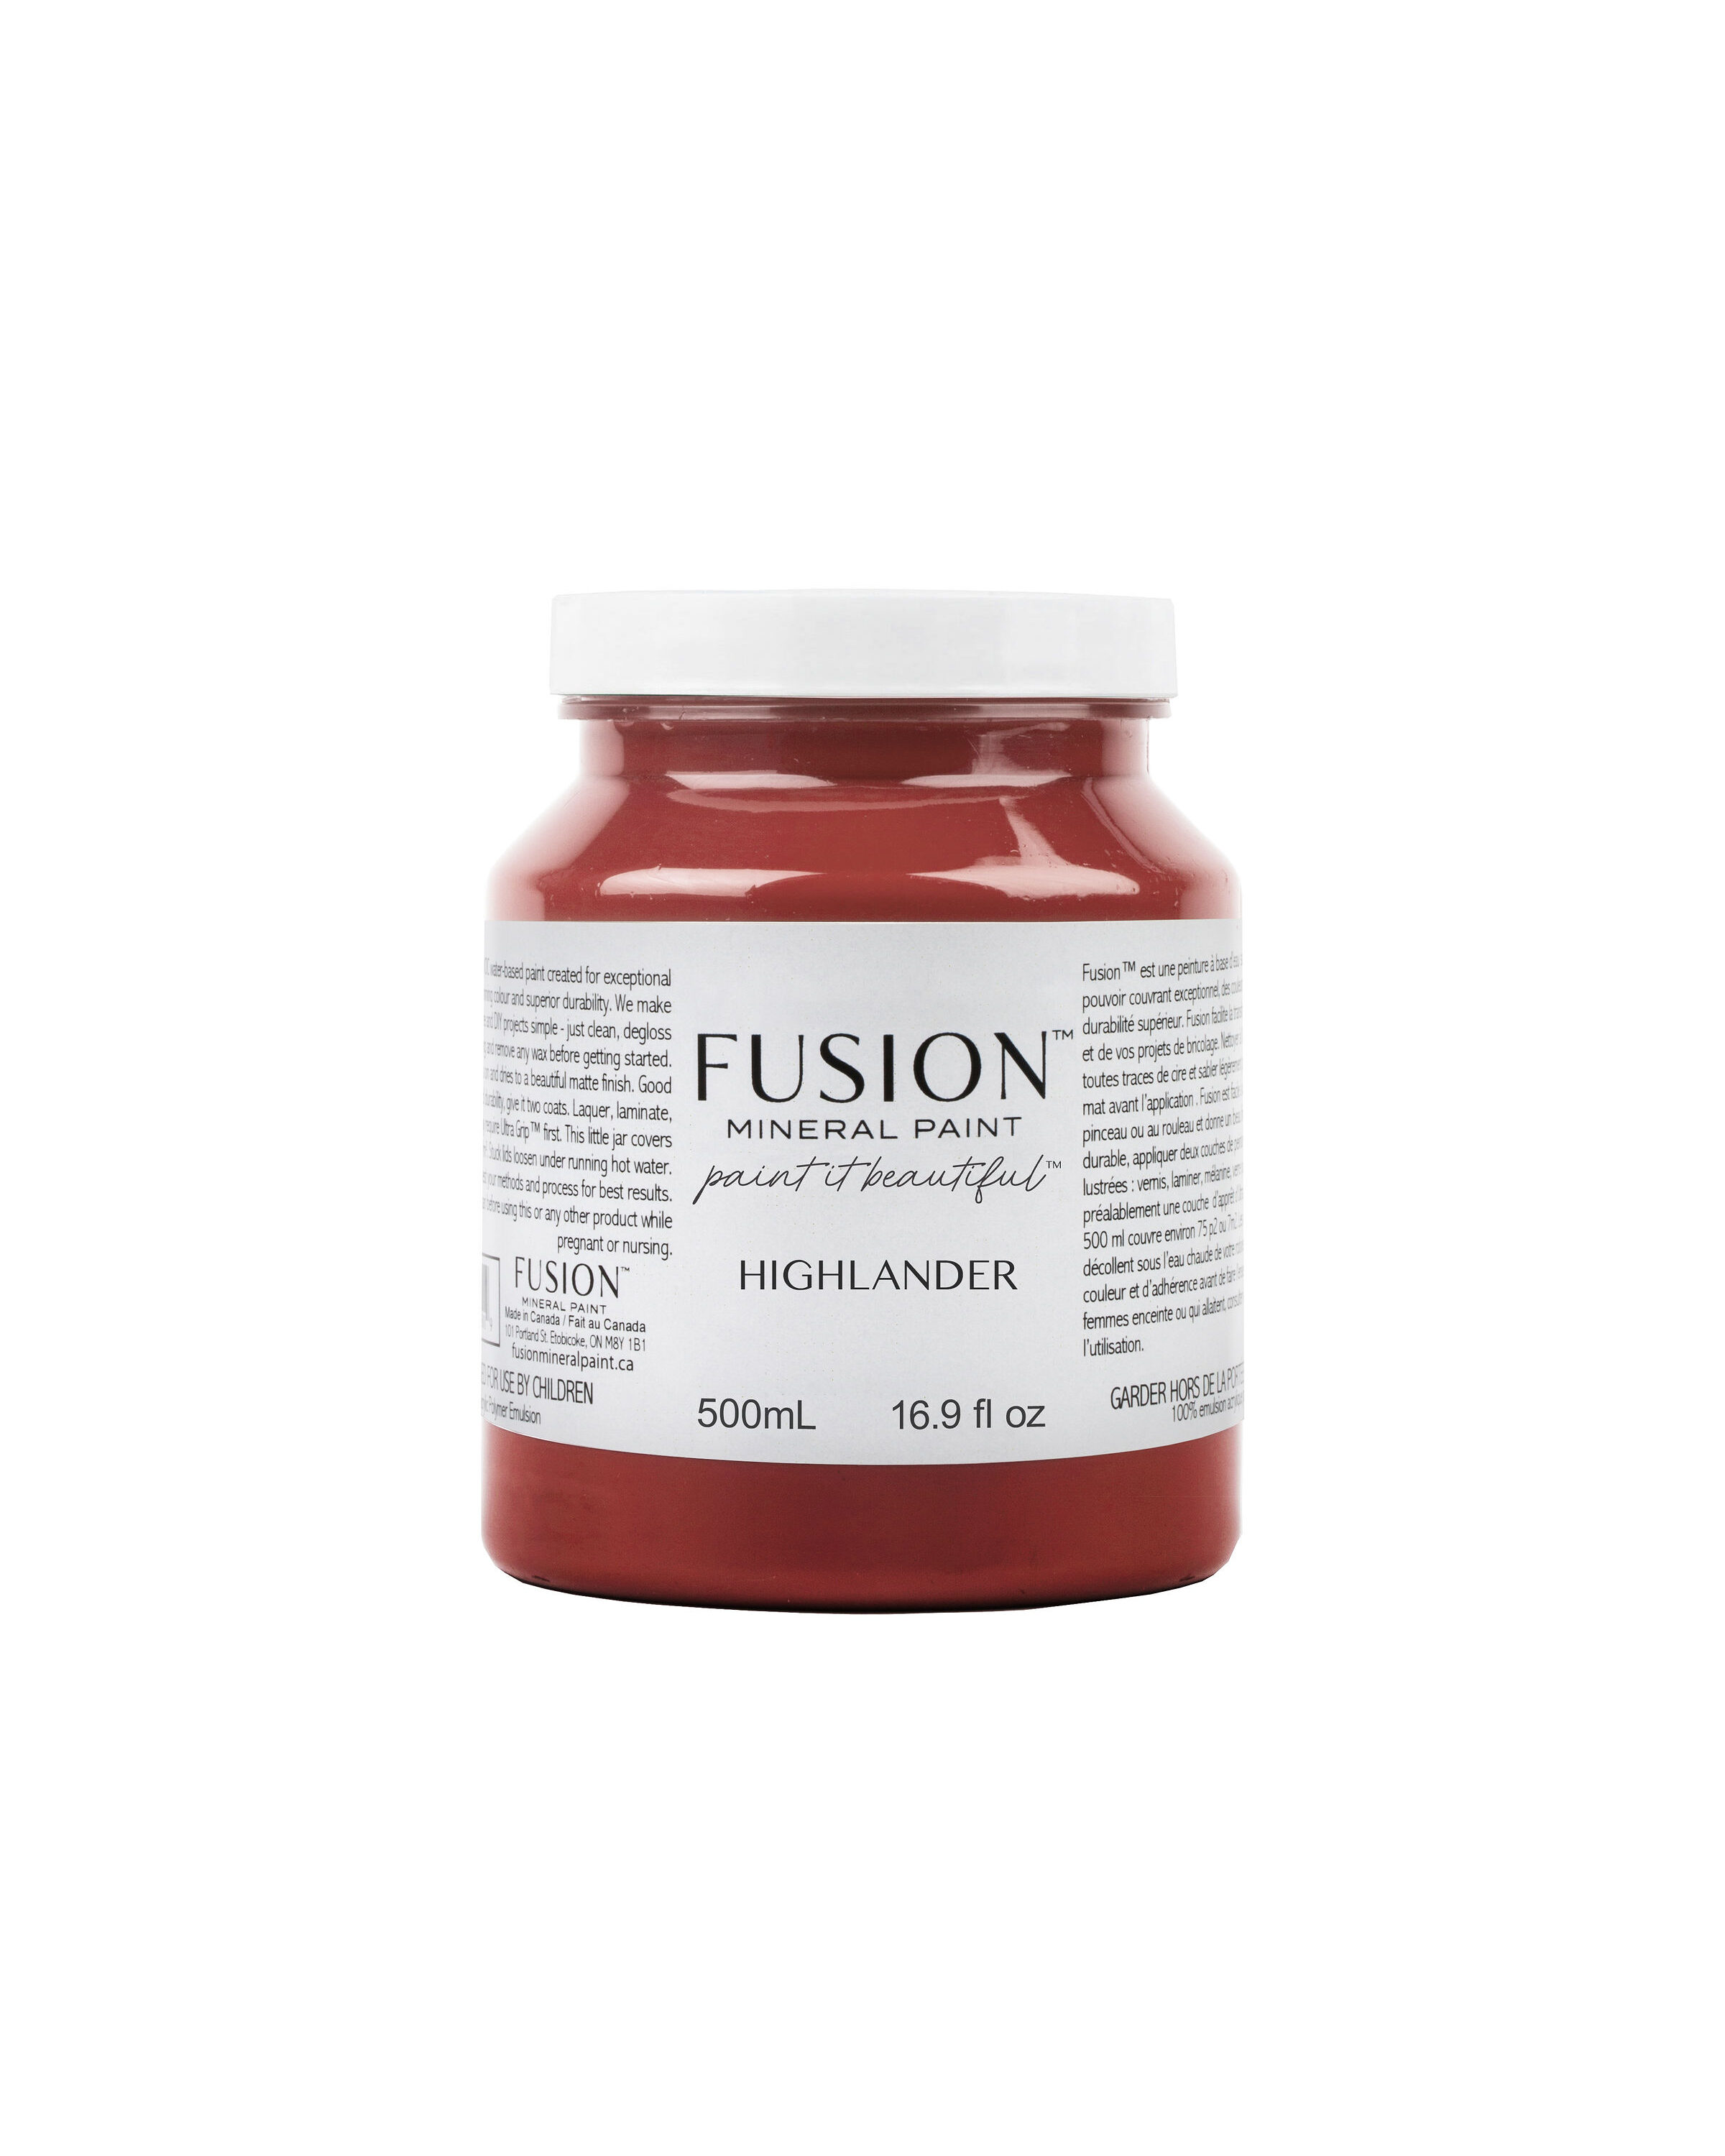 Fusion Mineral Paint vernice ecologica color rosso intenso